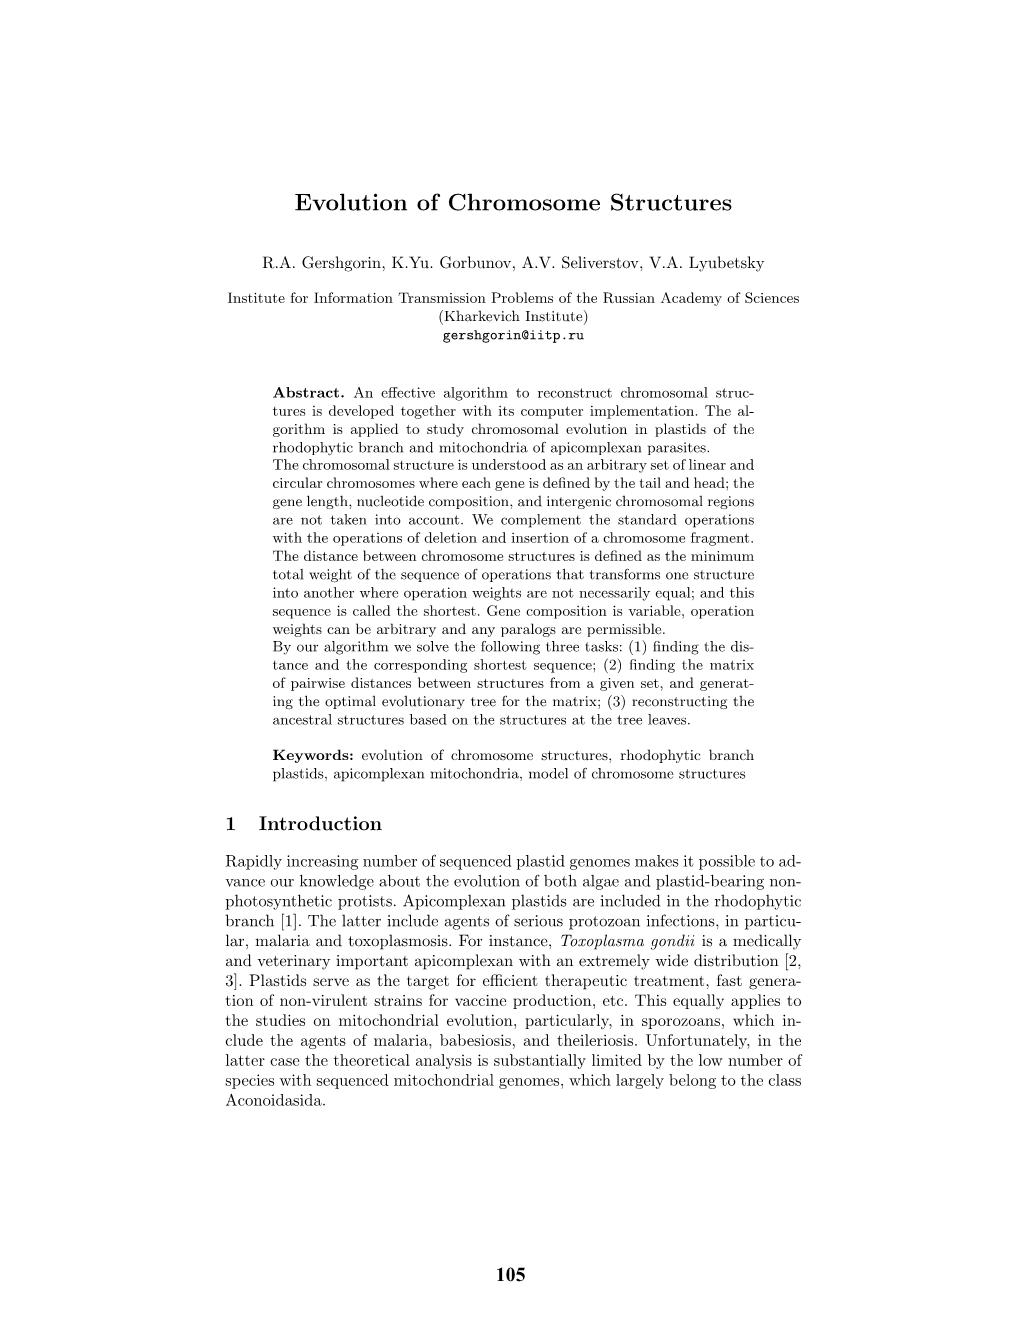 Evolution of Chromosome Structures Abstract